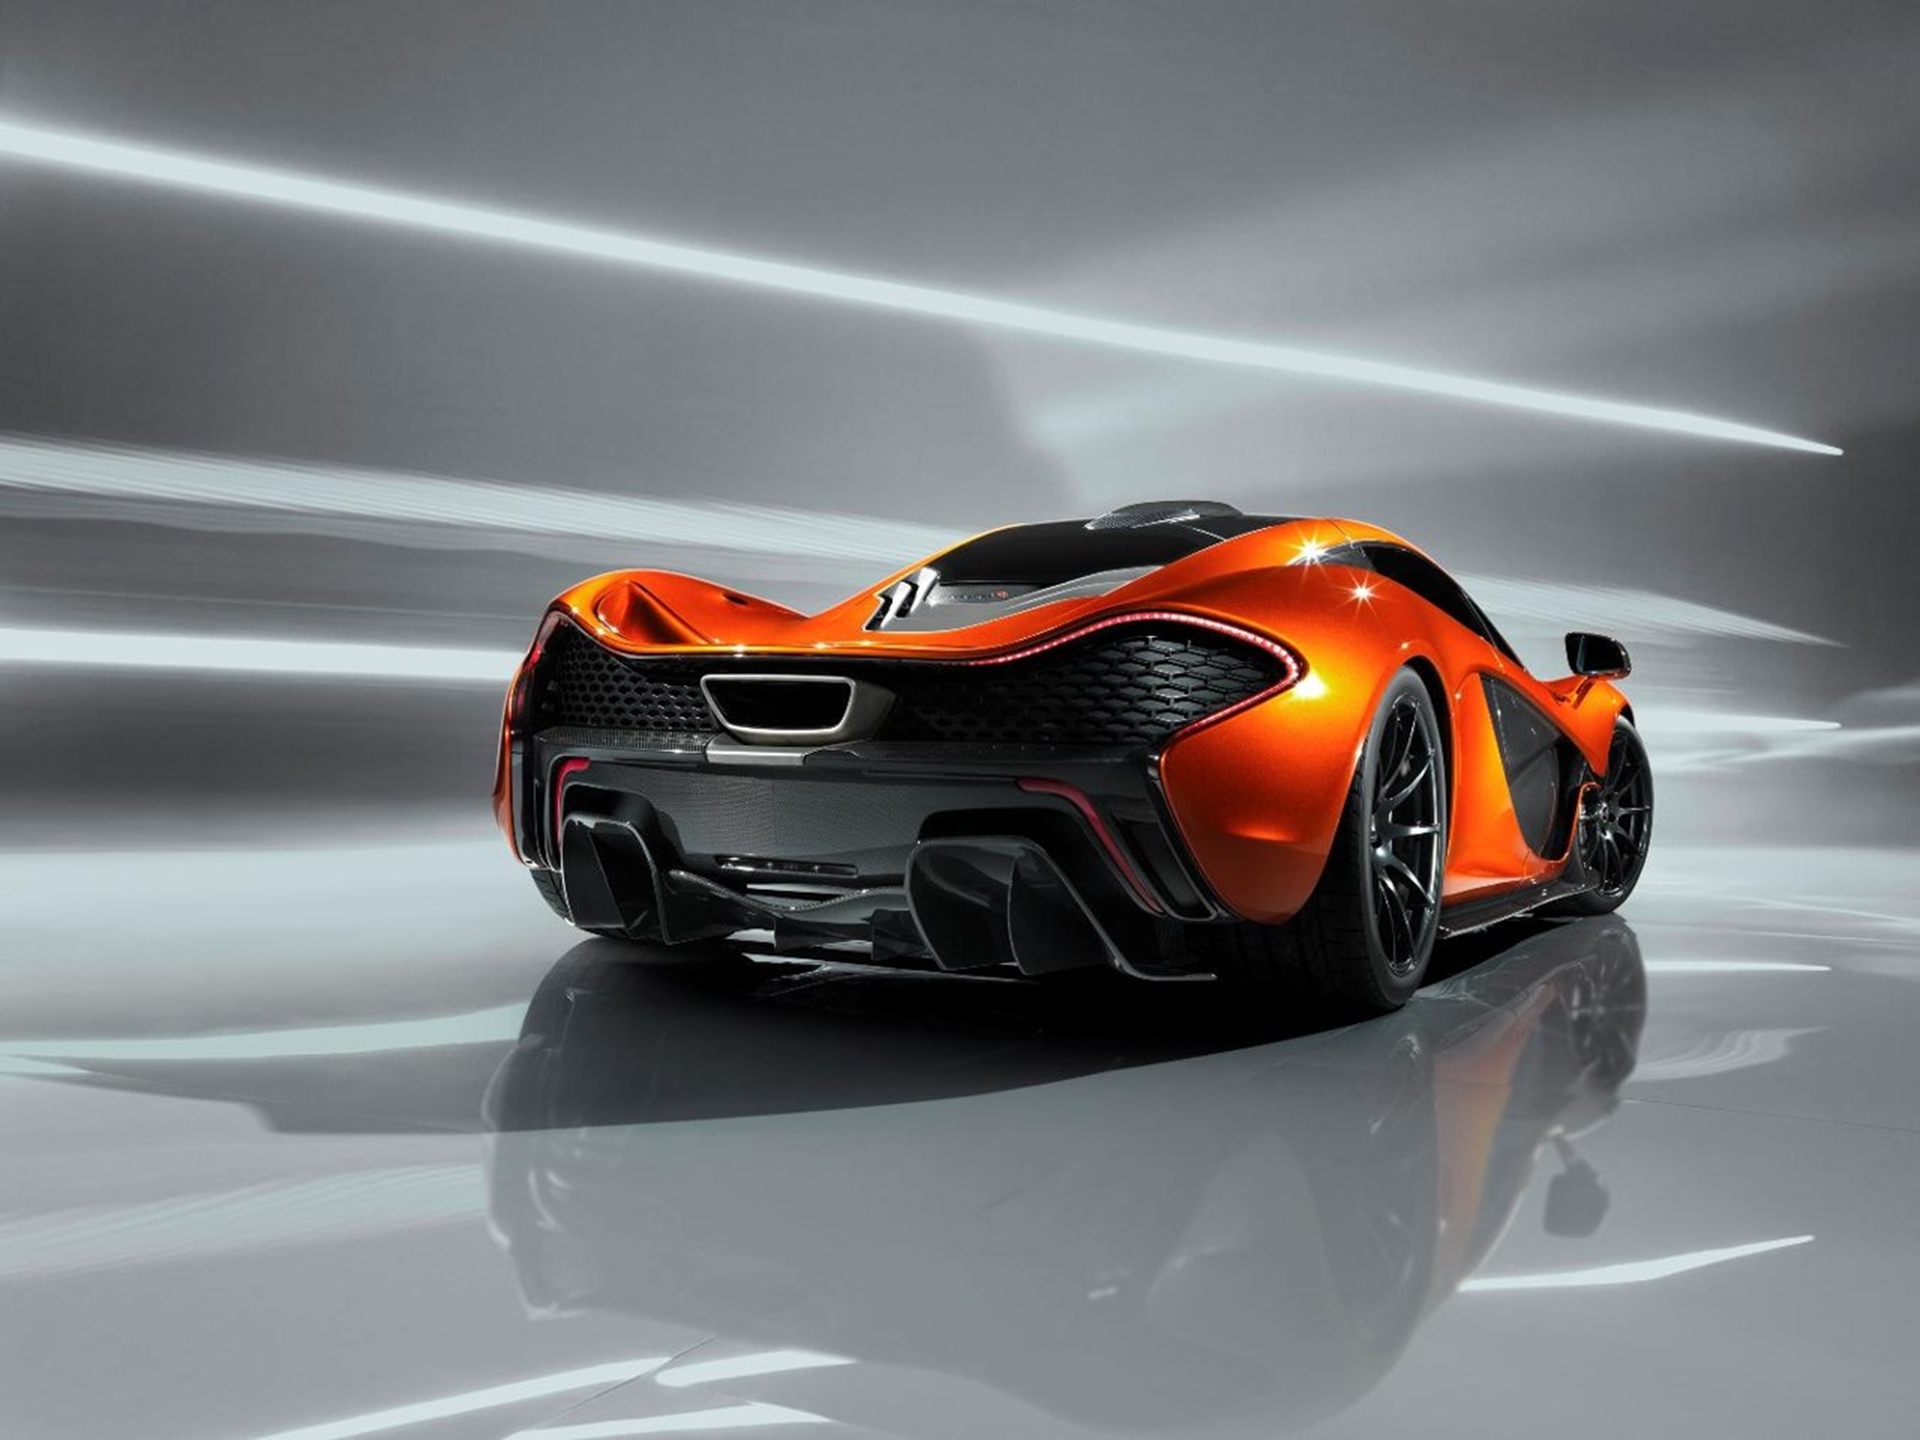 McLAREN P1 AIMS FOR POLE POSITION WITH GLOBAL DEBUT AT PARIS MOTOR SHOW